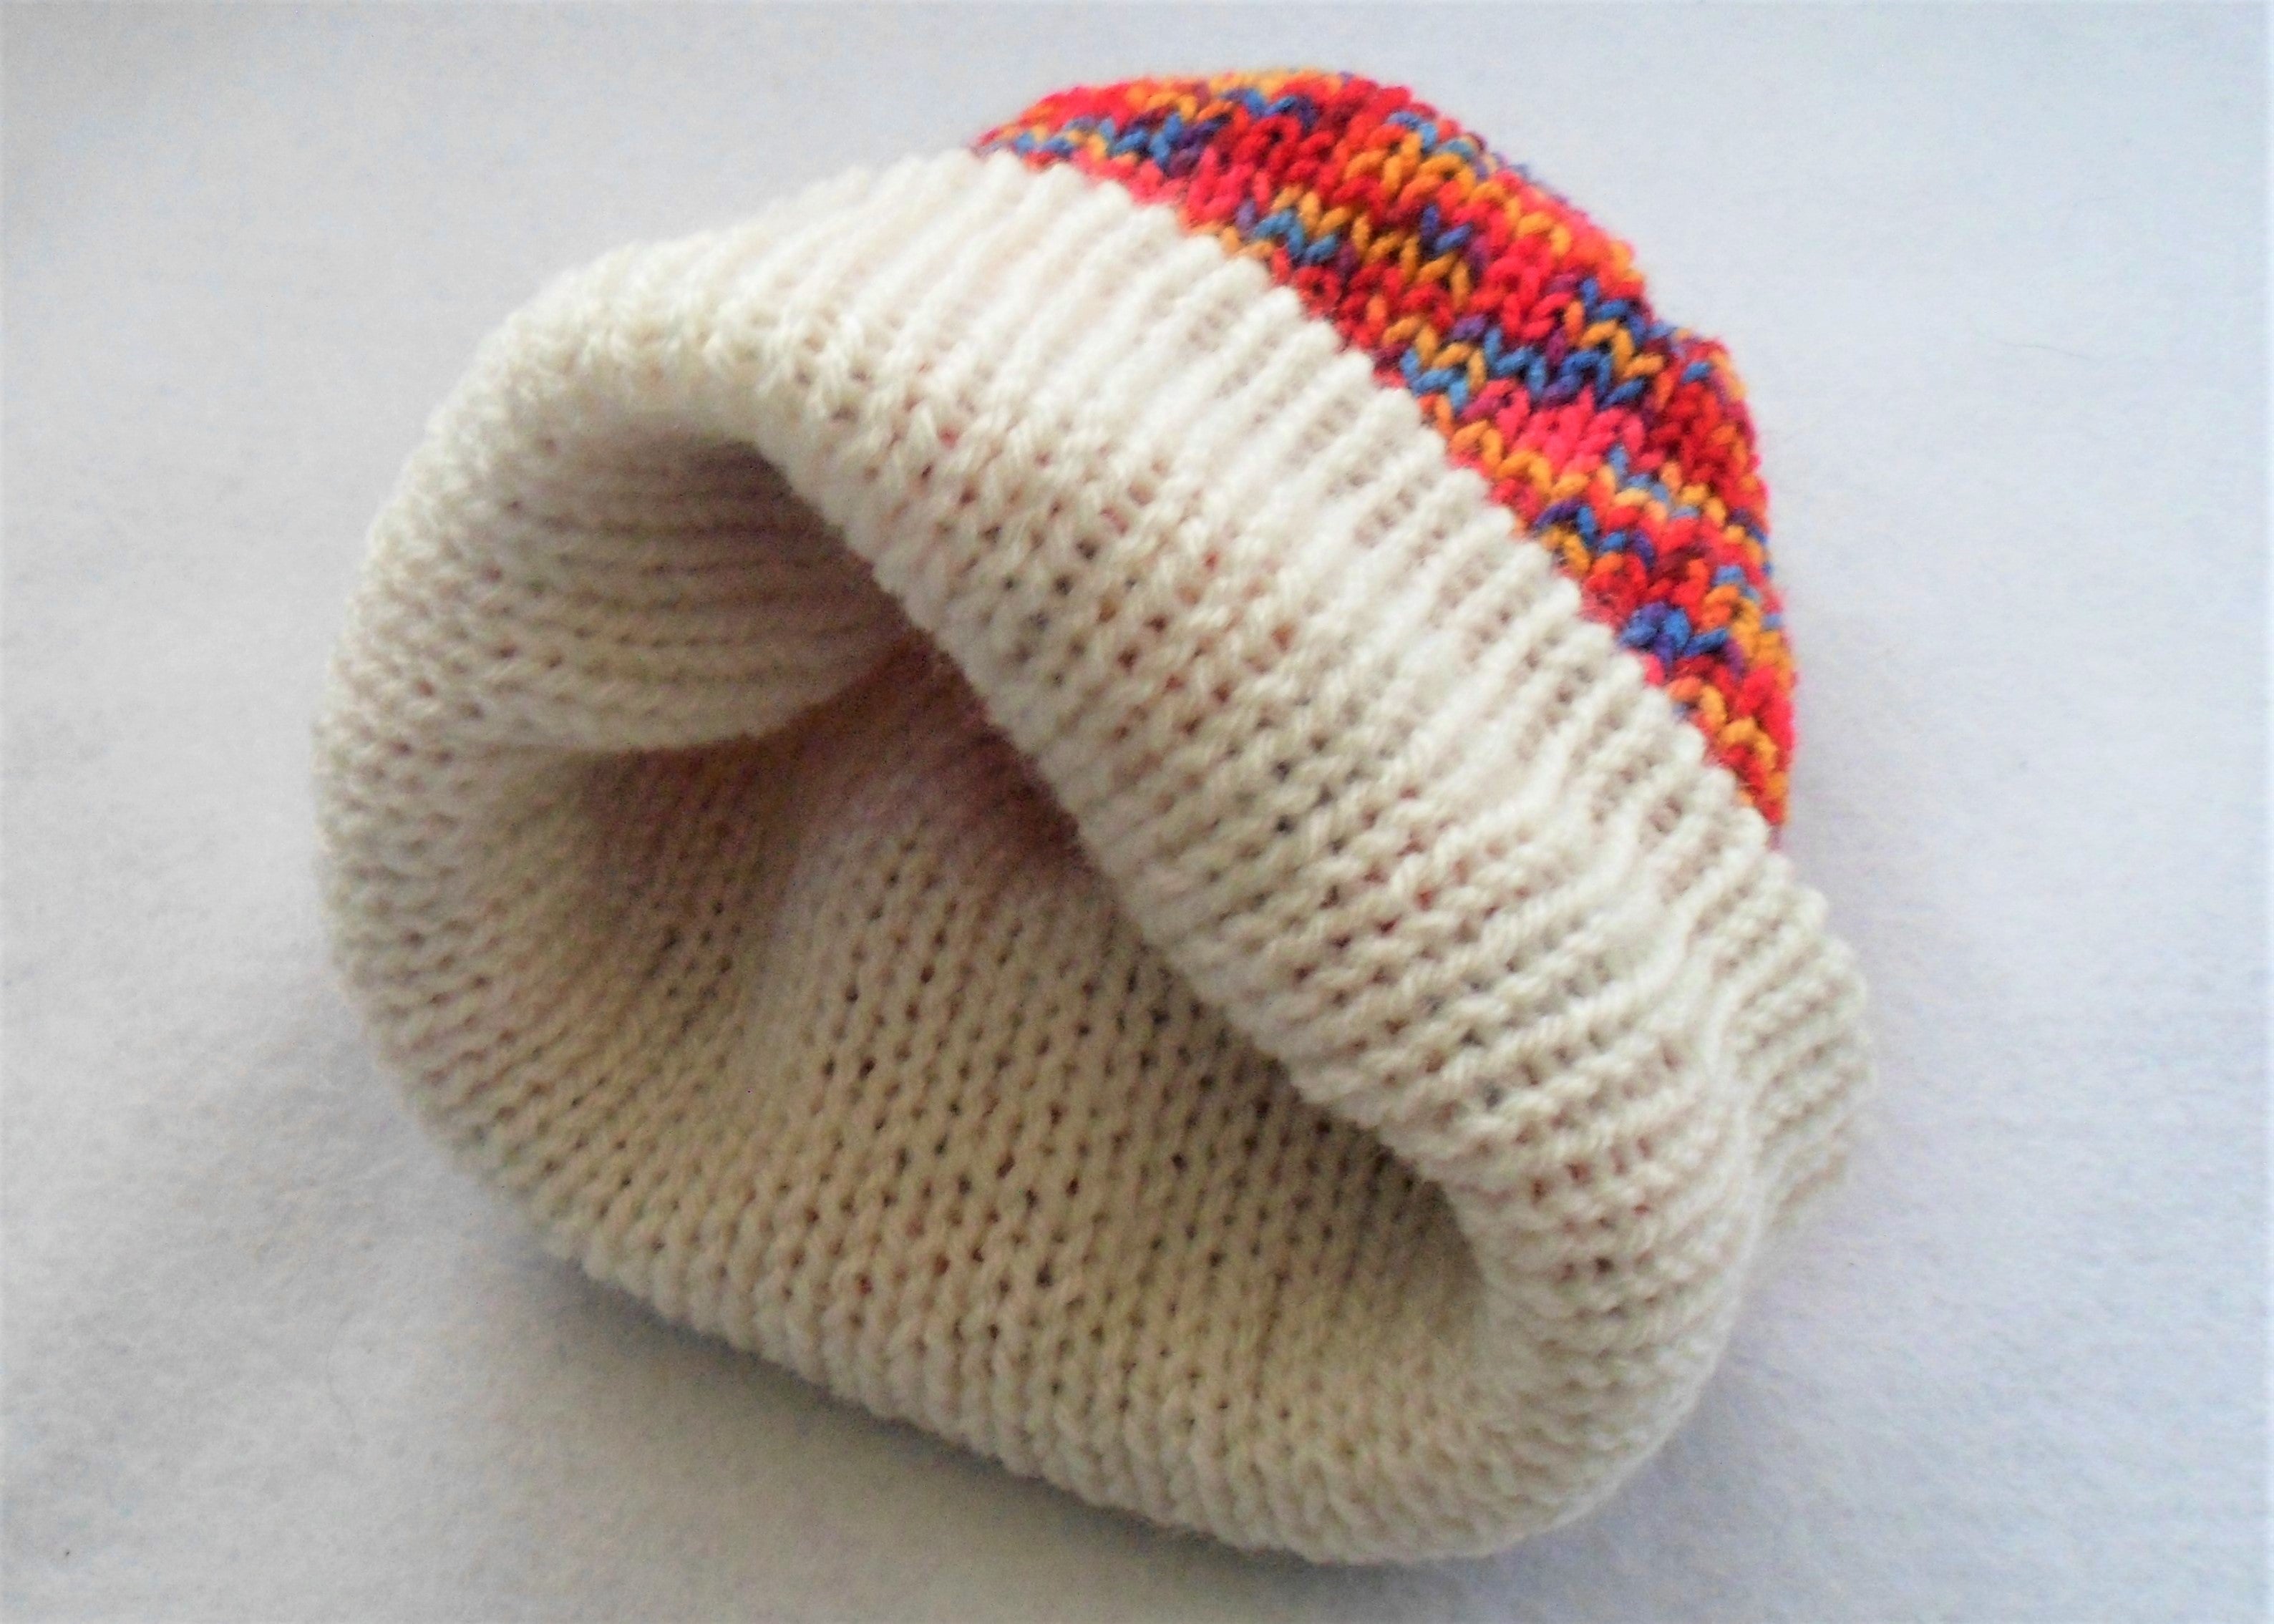 Knitted Plain White/Rainbow Variegated Reversible Hat - Tully Crafts